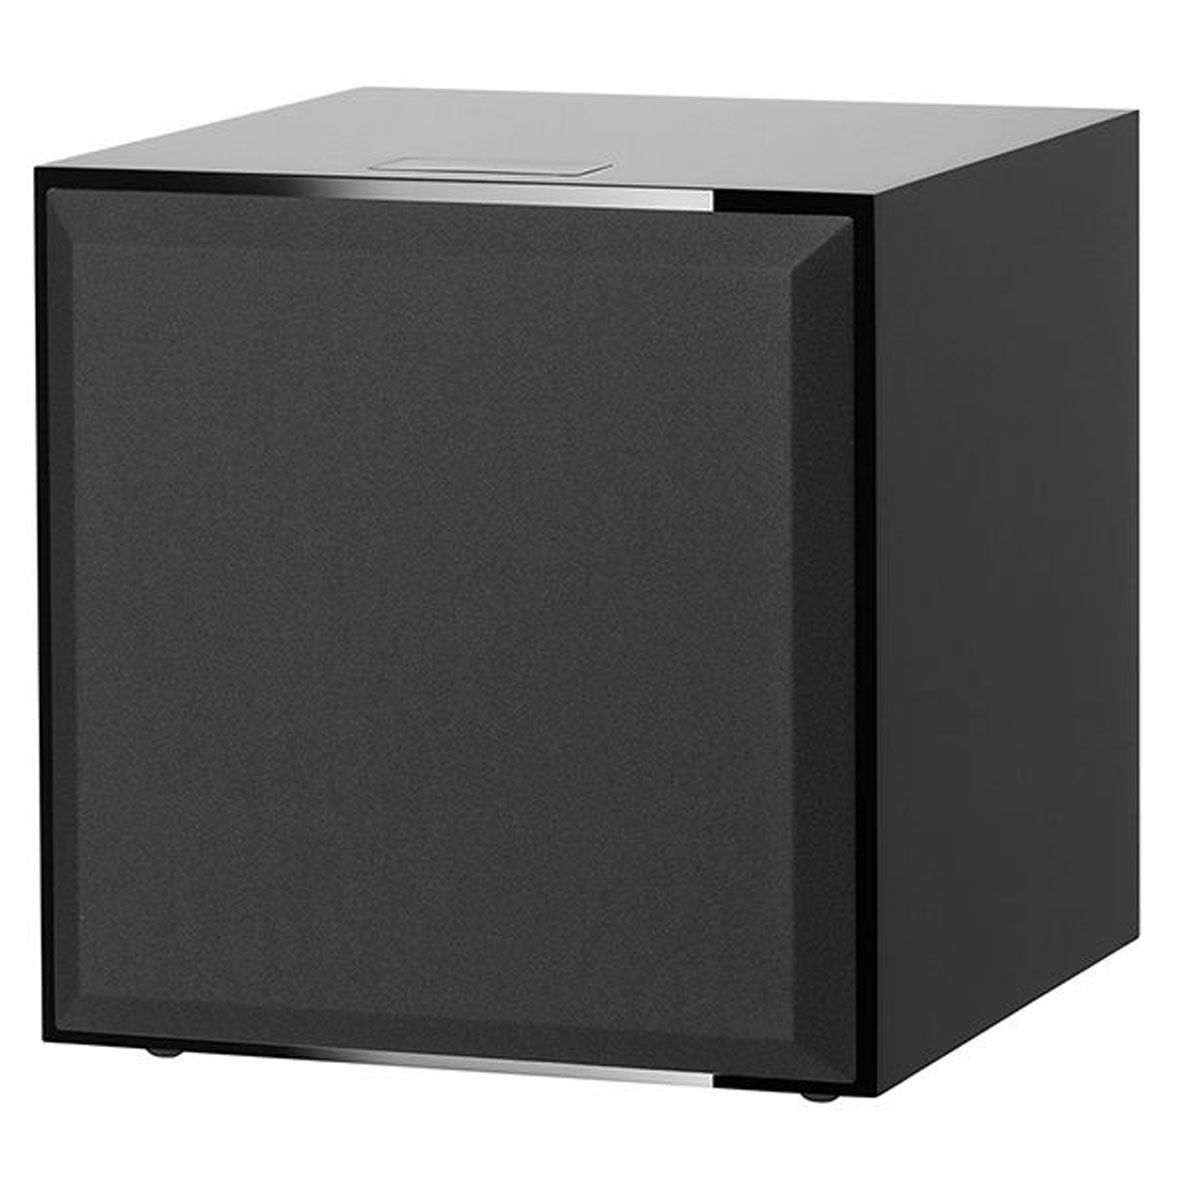 Bowers & Wilkins DB4S Subwoofer - Gloss Black - Front angled view with grille